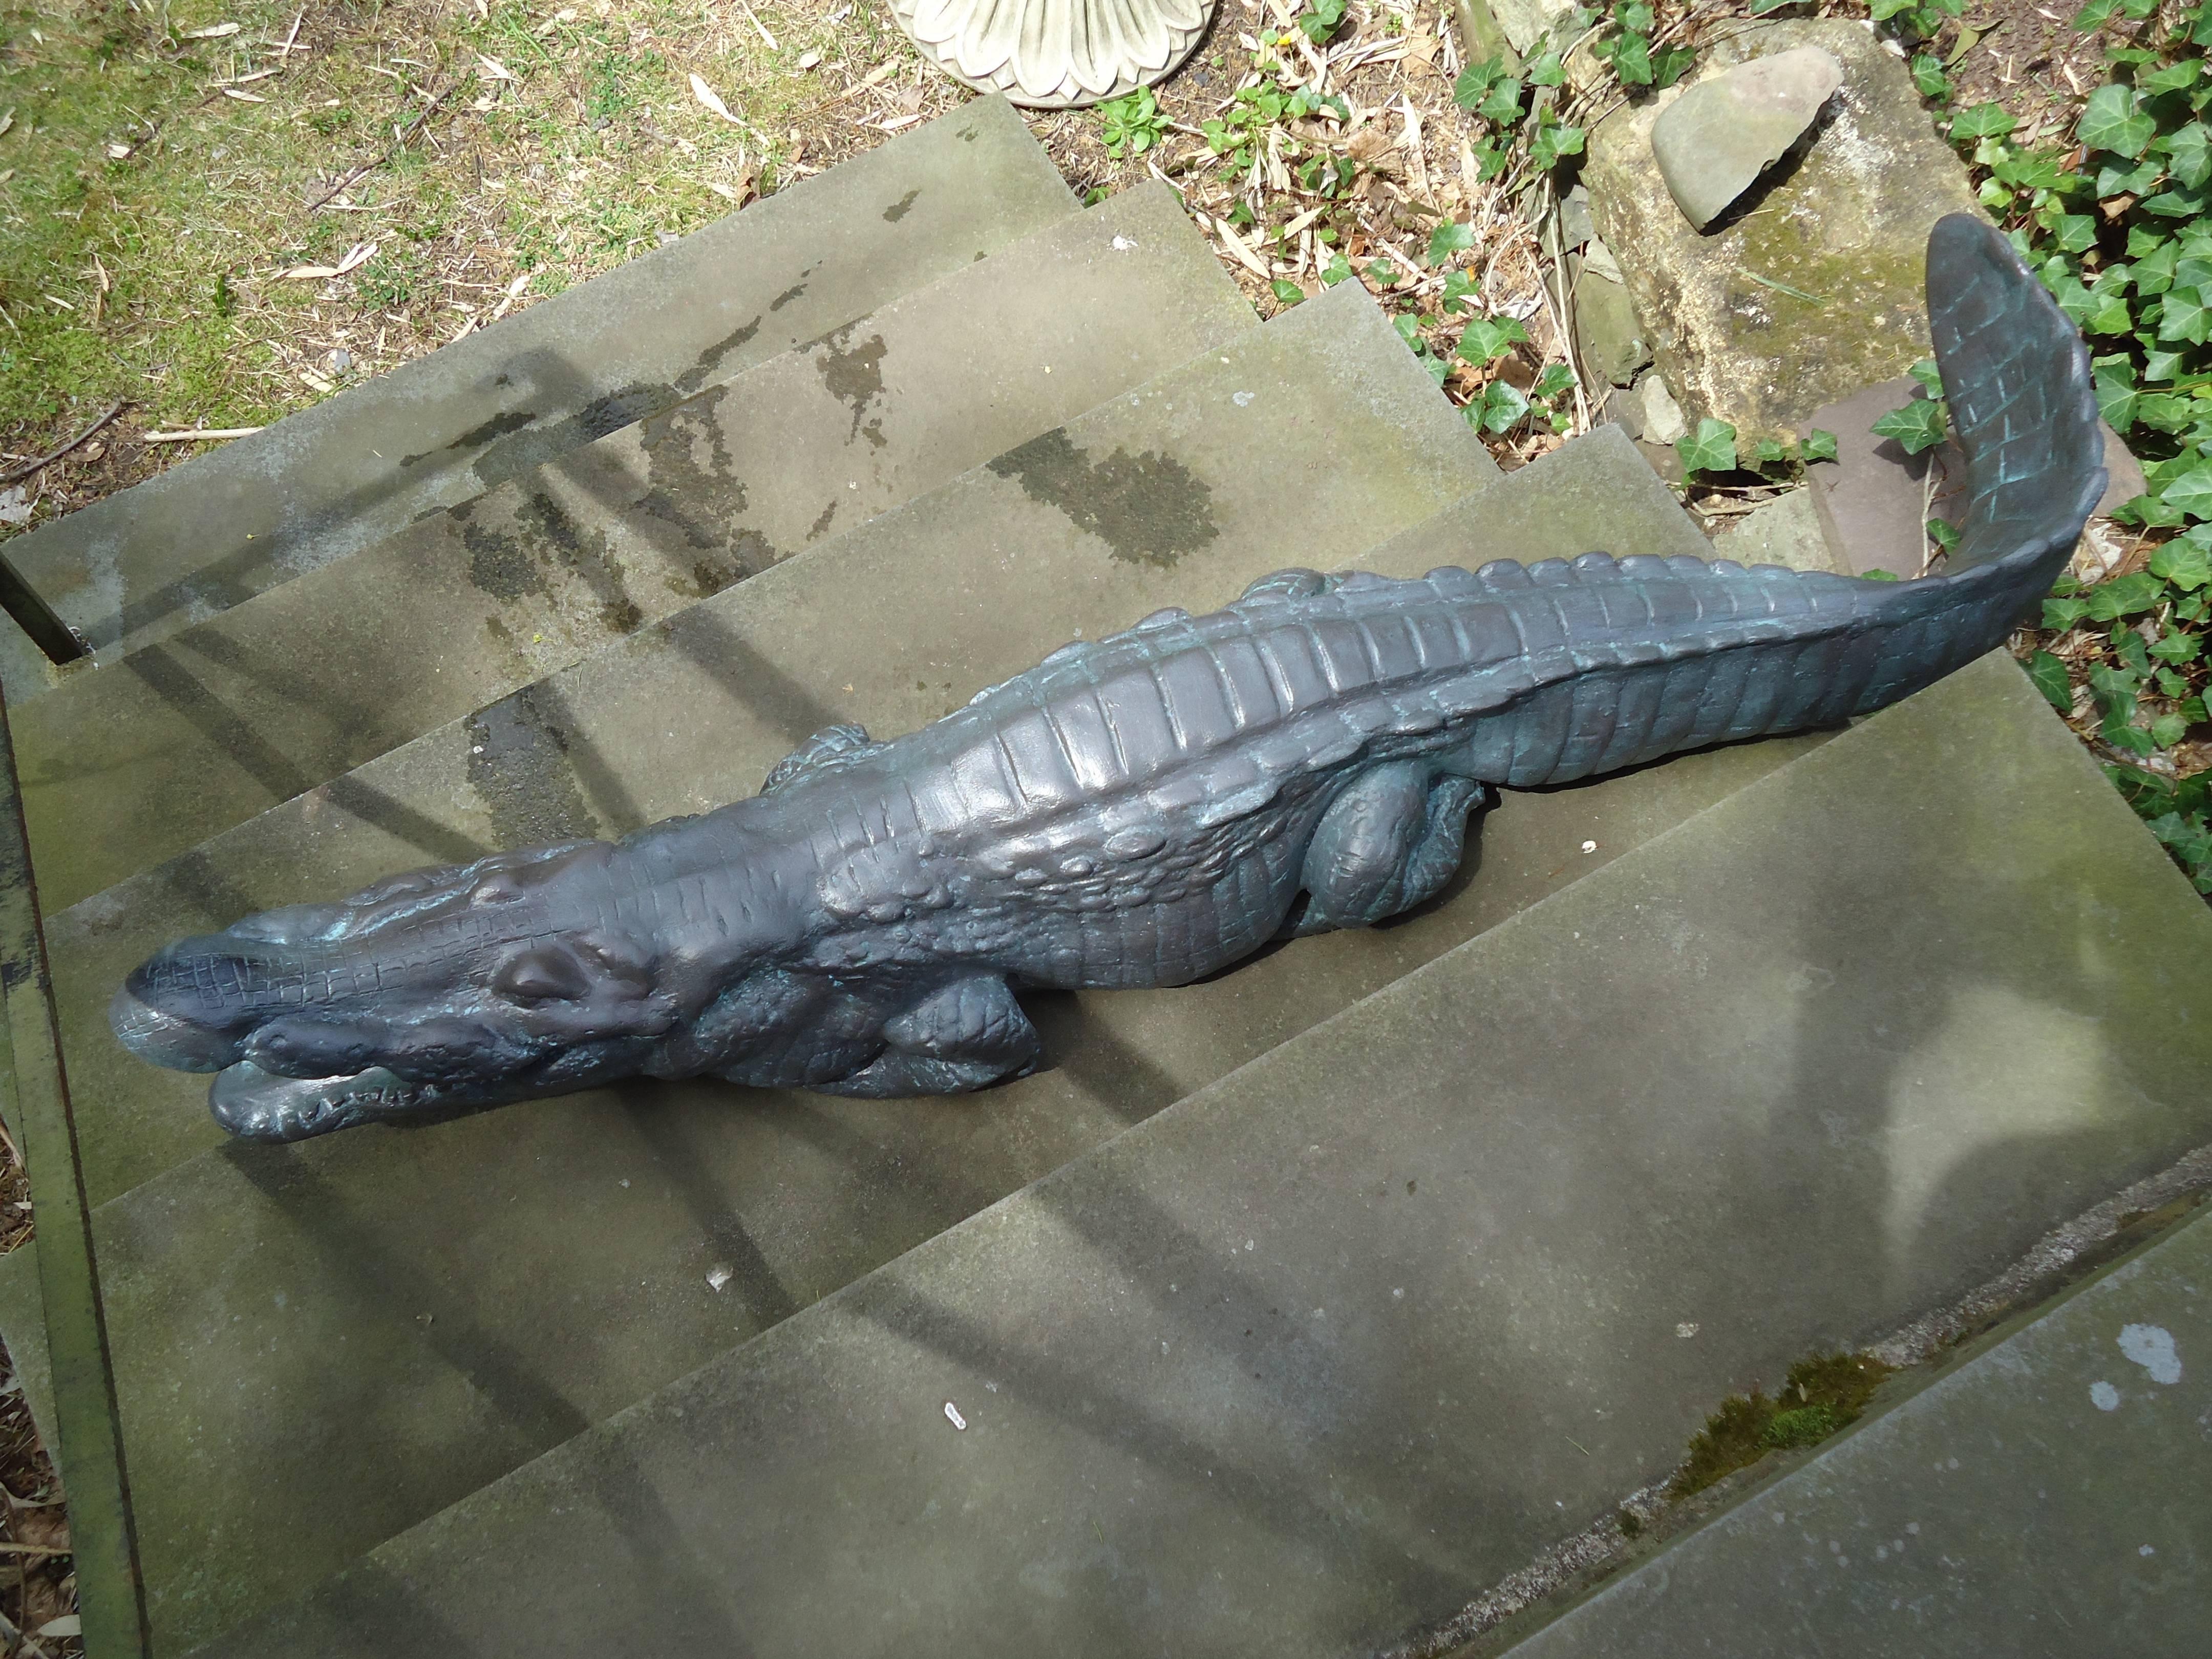 A fiberglass resin sculpture of an alligator hand cast from an original antique, having intricate details and a hand-painted faux bronze finish with verdigris. This high quality medium is impervious to weather, durable and maintenance free. It’s